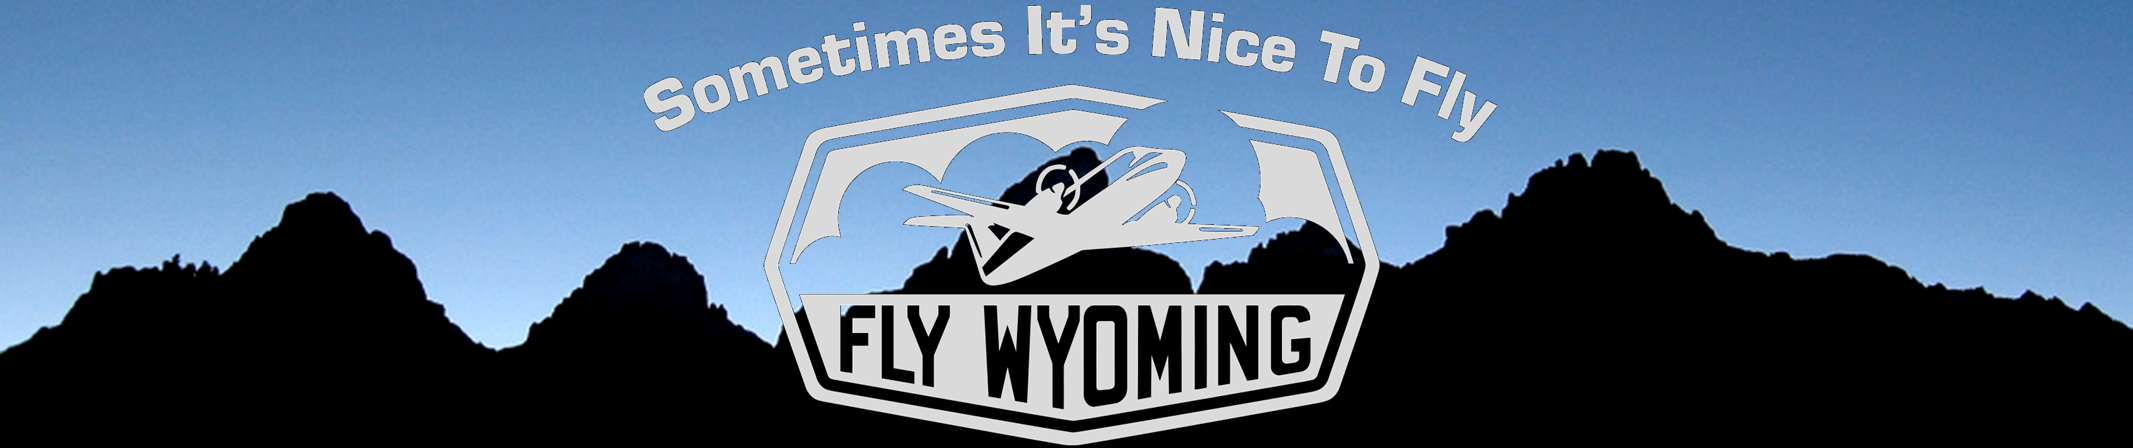 FLY_WYOMING_BANNER.png